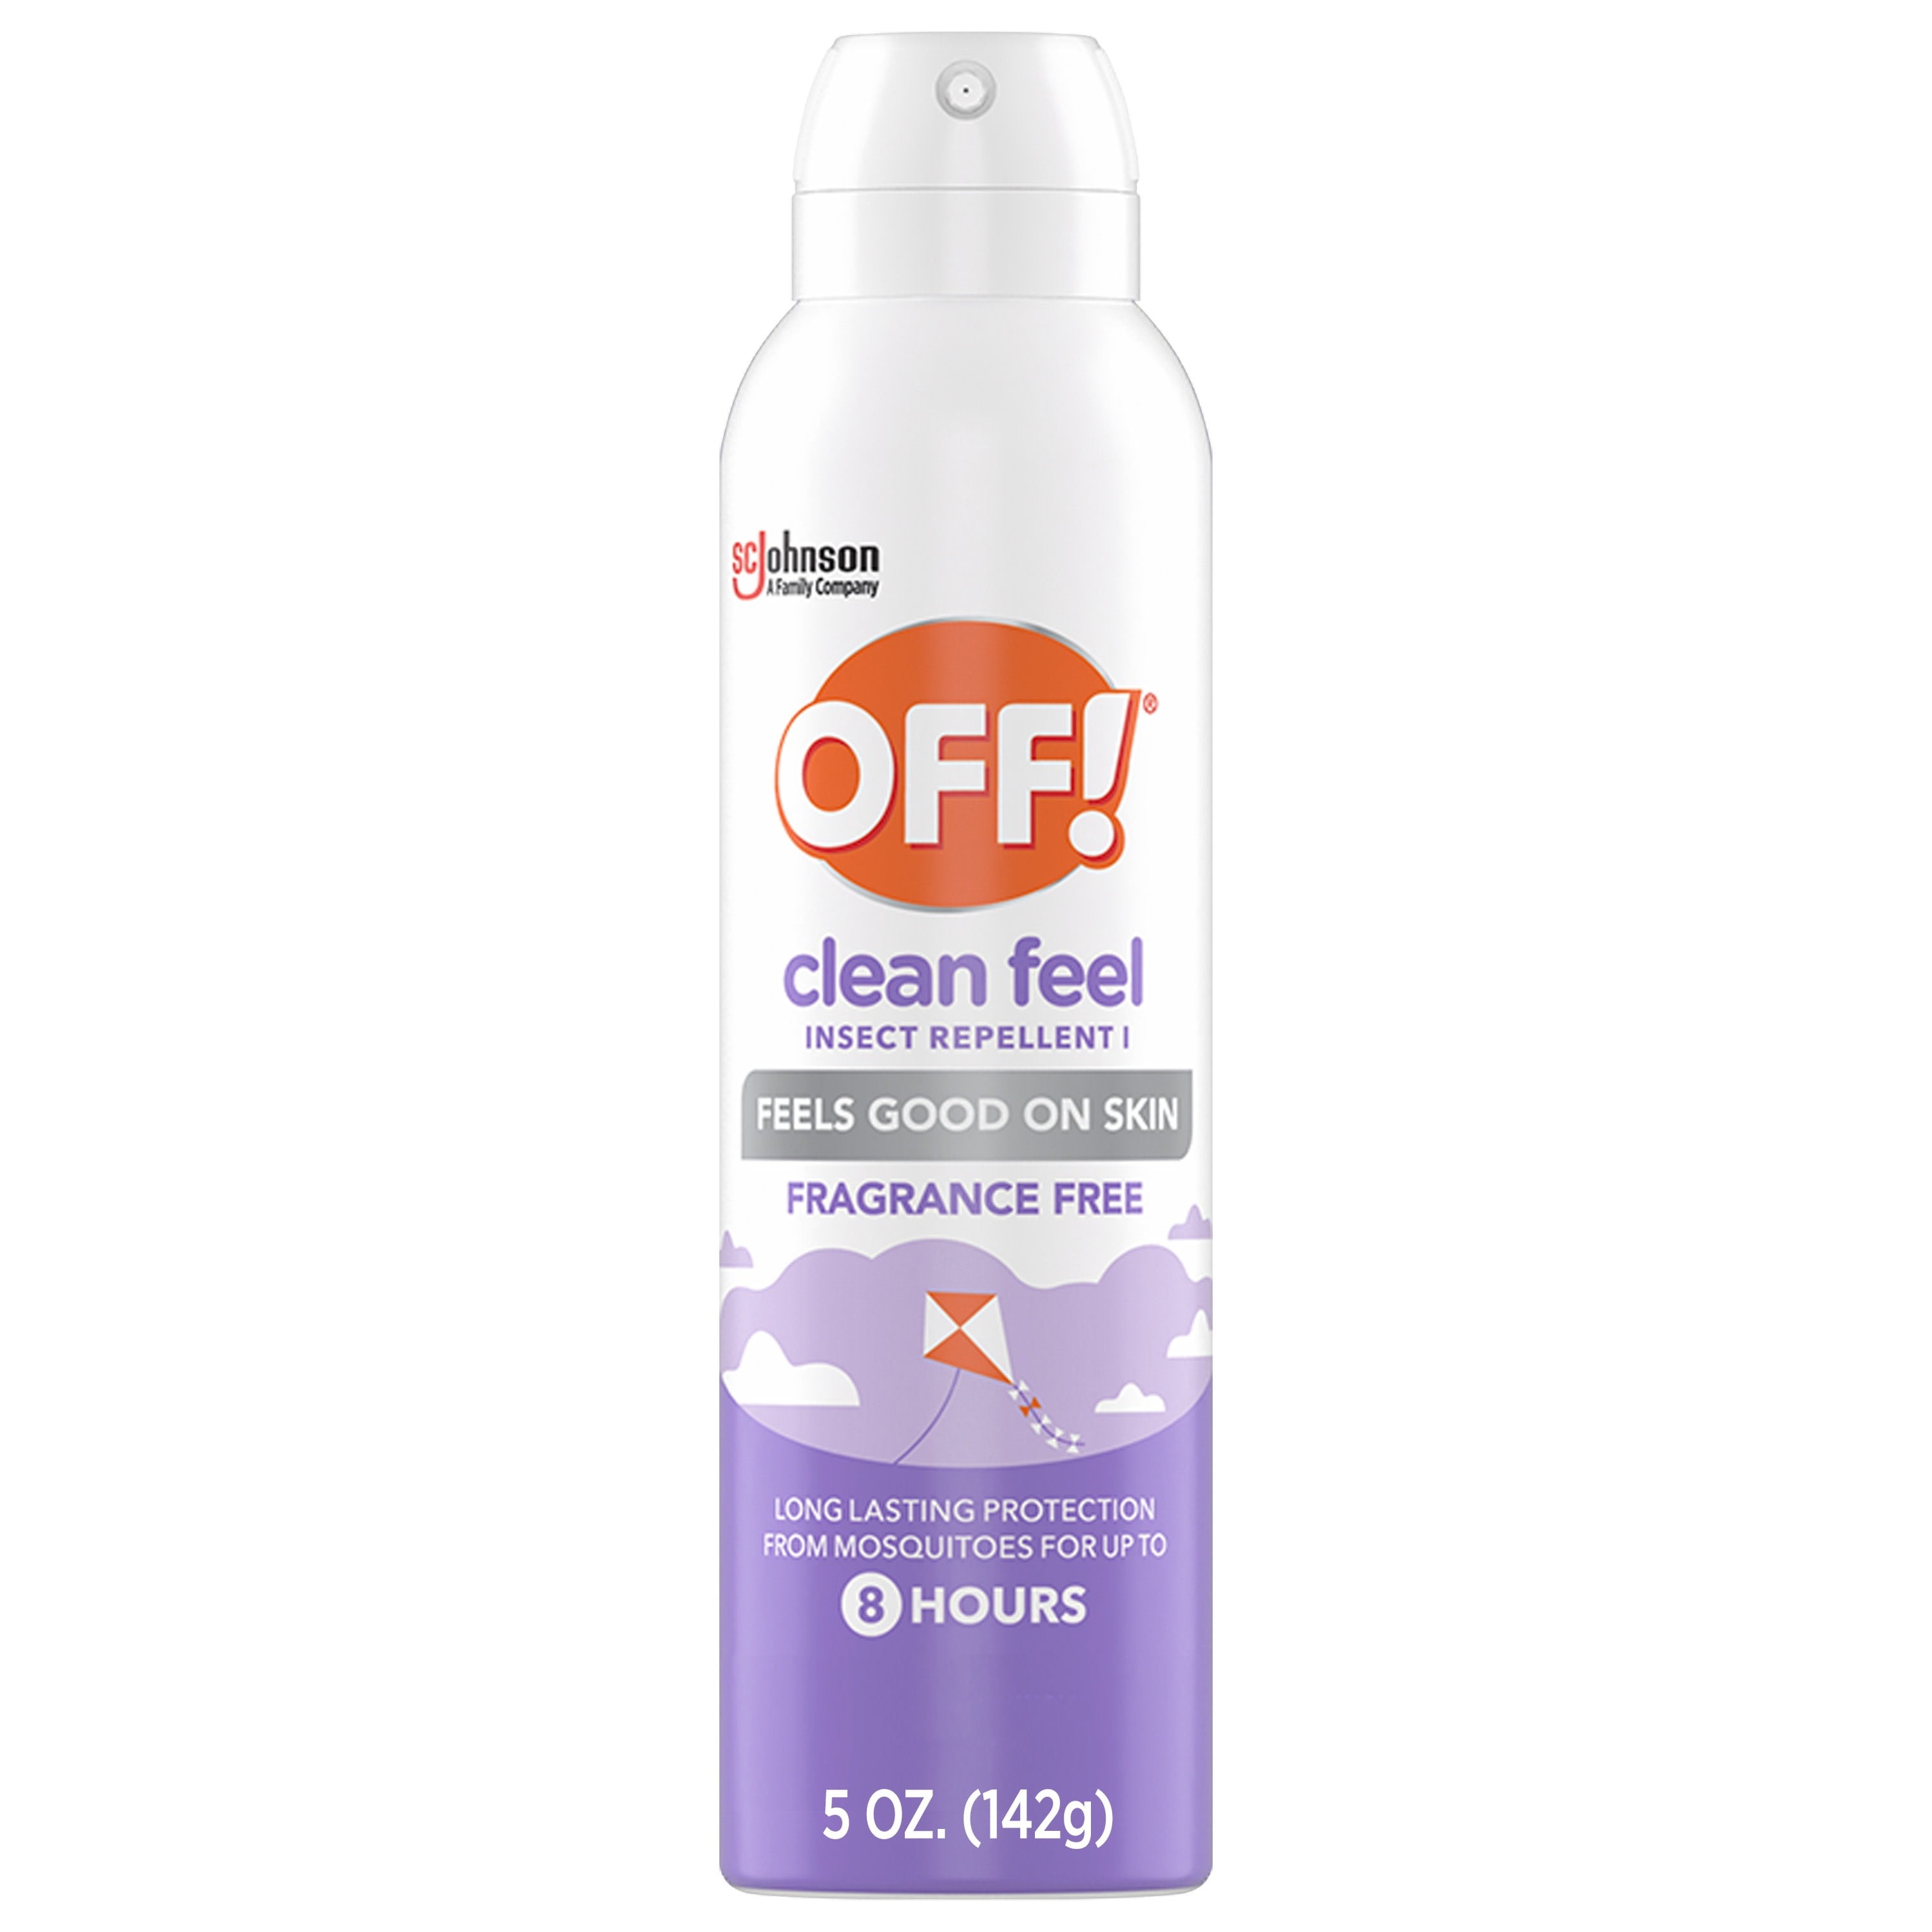 Off! Botanicals Insect Repellent IV, Plant-Based Active Ingredient